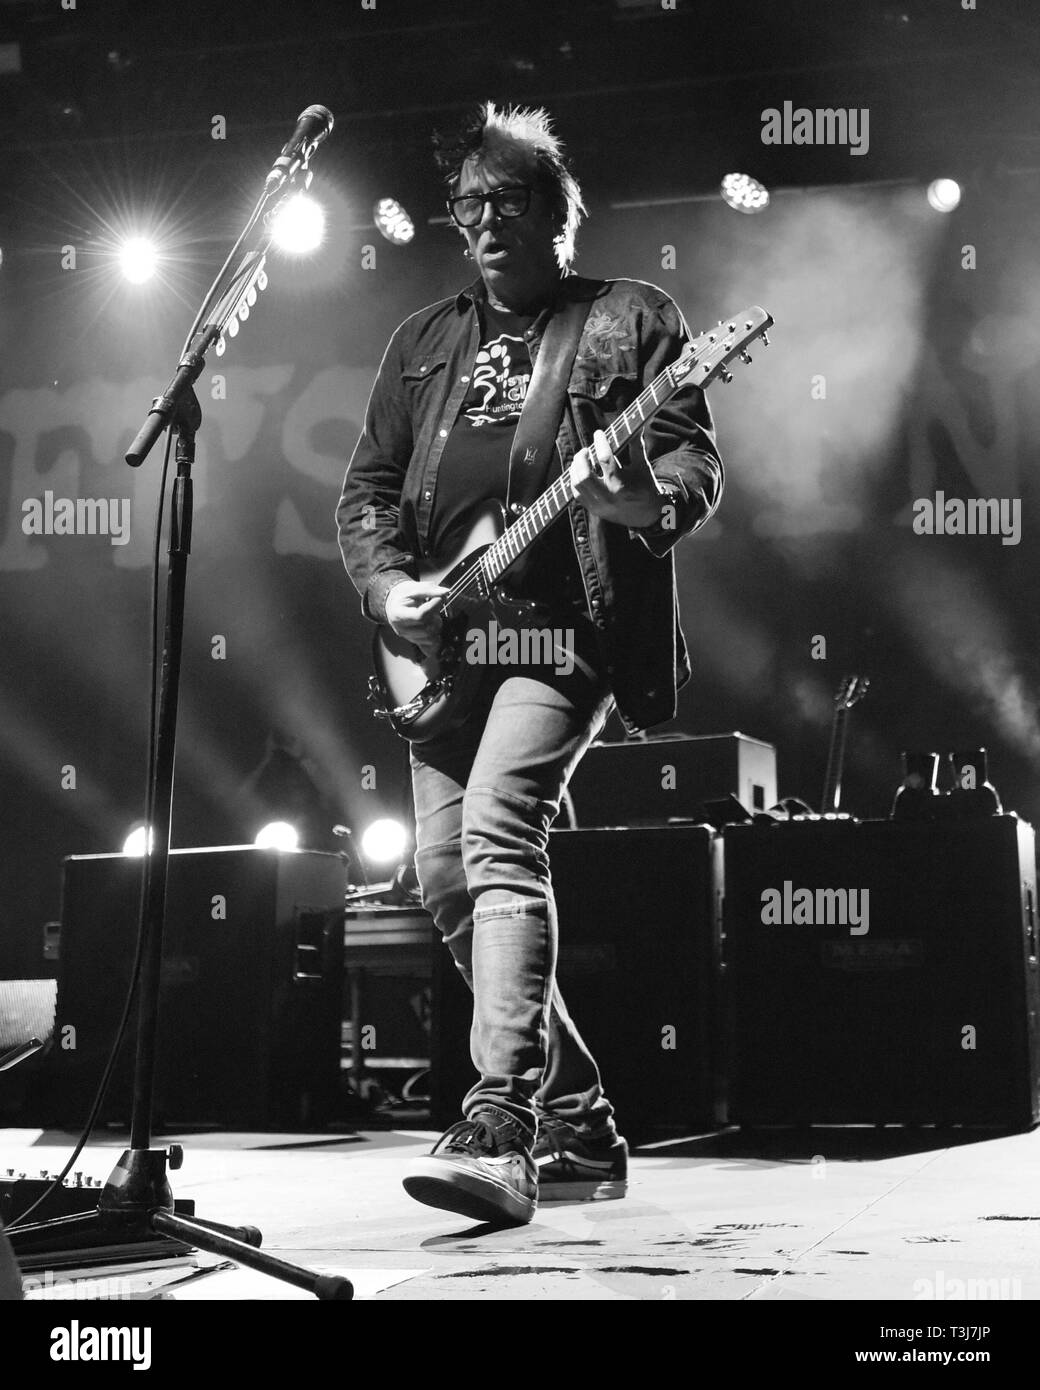 April 7, 2019 - Dana Point, California, USA - Lead guitist NOODLES (Kevin John Wasserman) of The Offspring performs at the Sabroso Craft Beer, Taco & Music Festival 2019 Sunday (Day 2) at Doheny State Beach in Dana Point, California. (Credit Image: © Billy Bennight/ZUMA Wire) Stock Photo